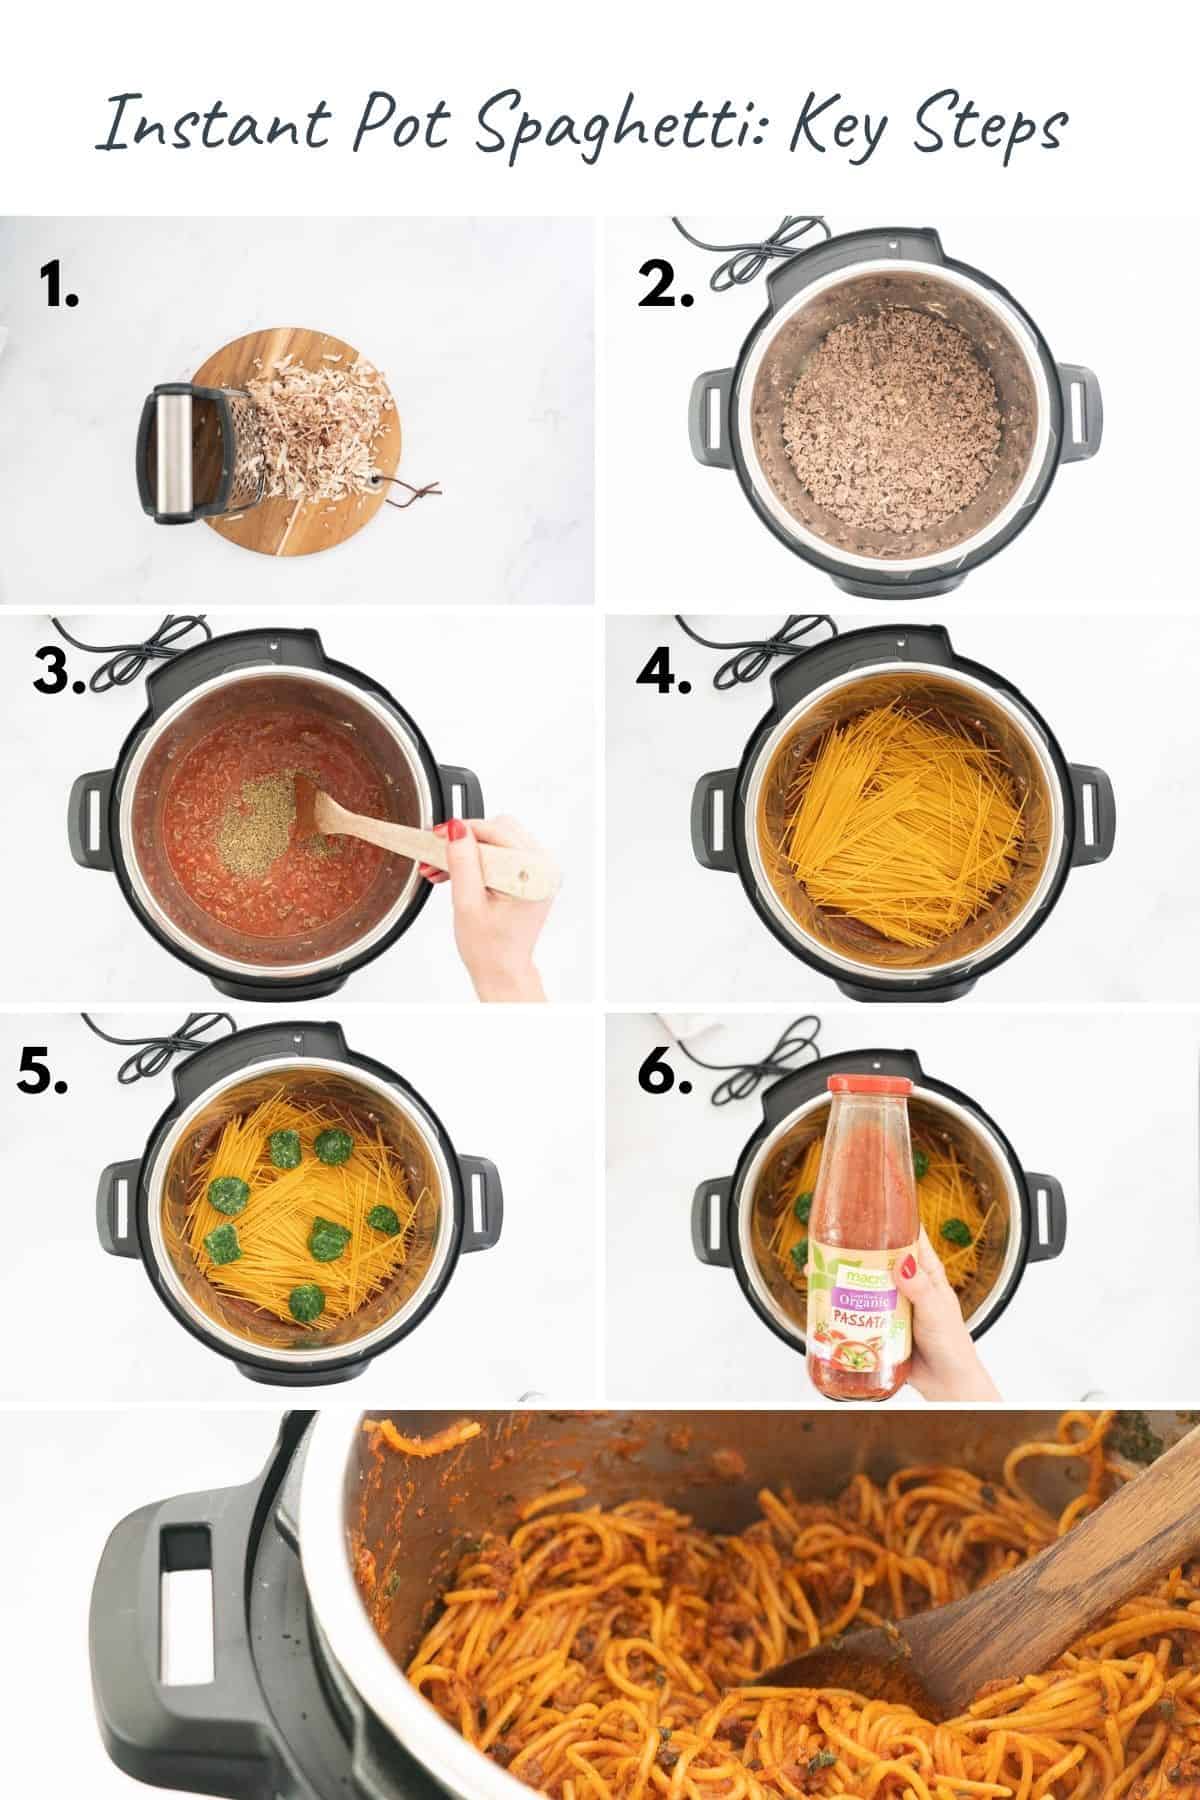 7 photo collage showing the steps to making instant pot spaghetti bolognese